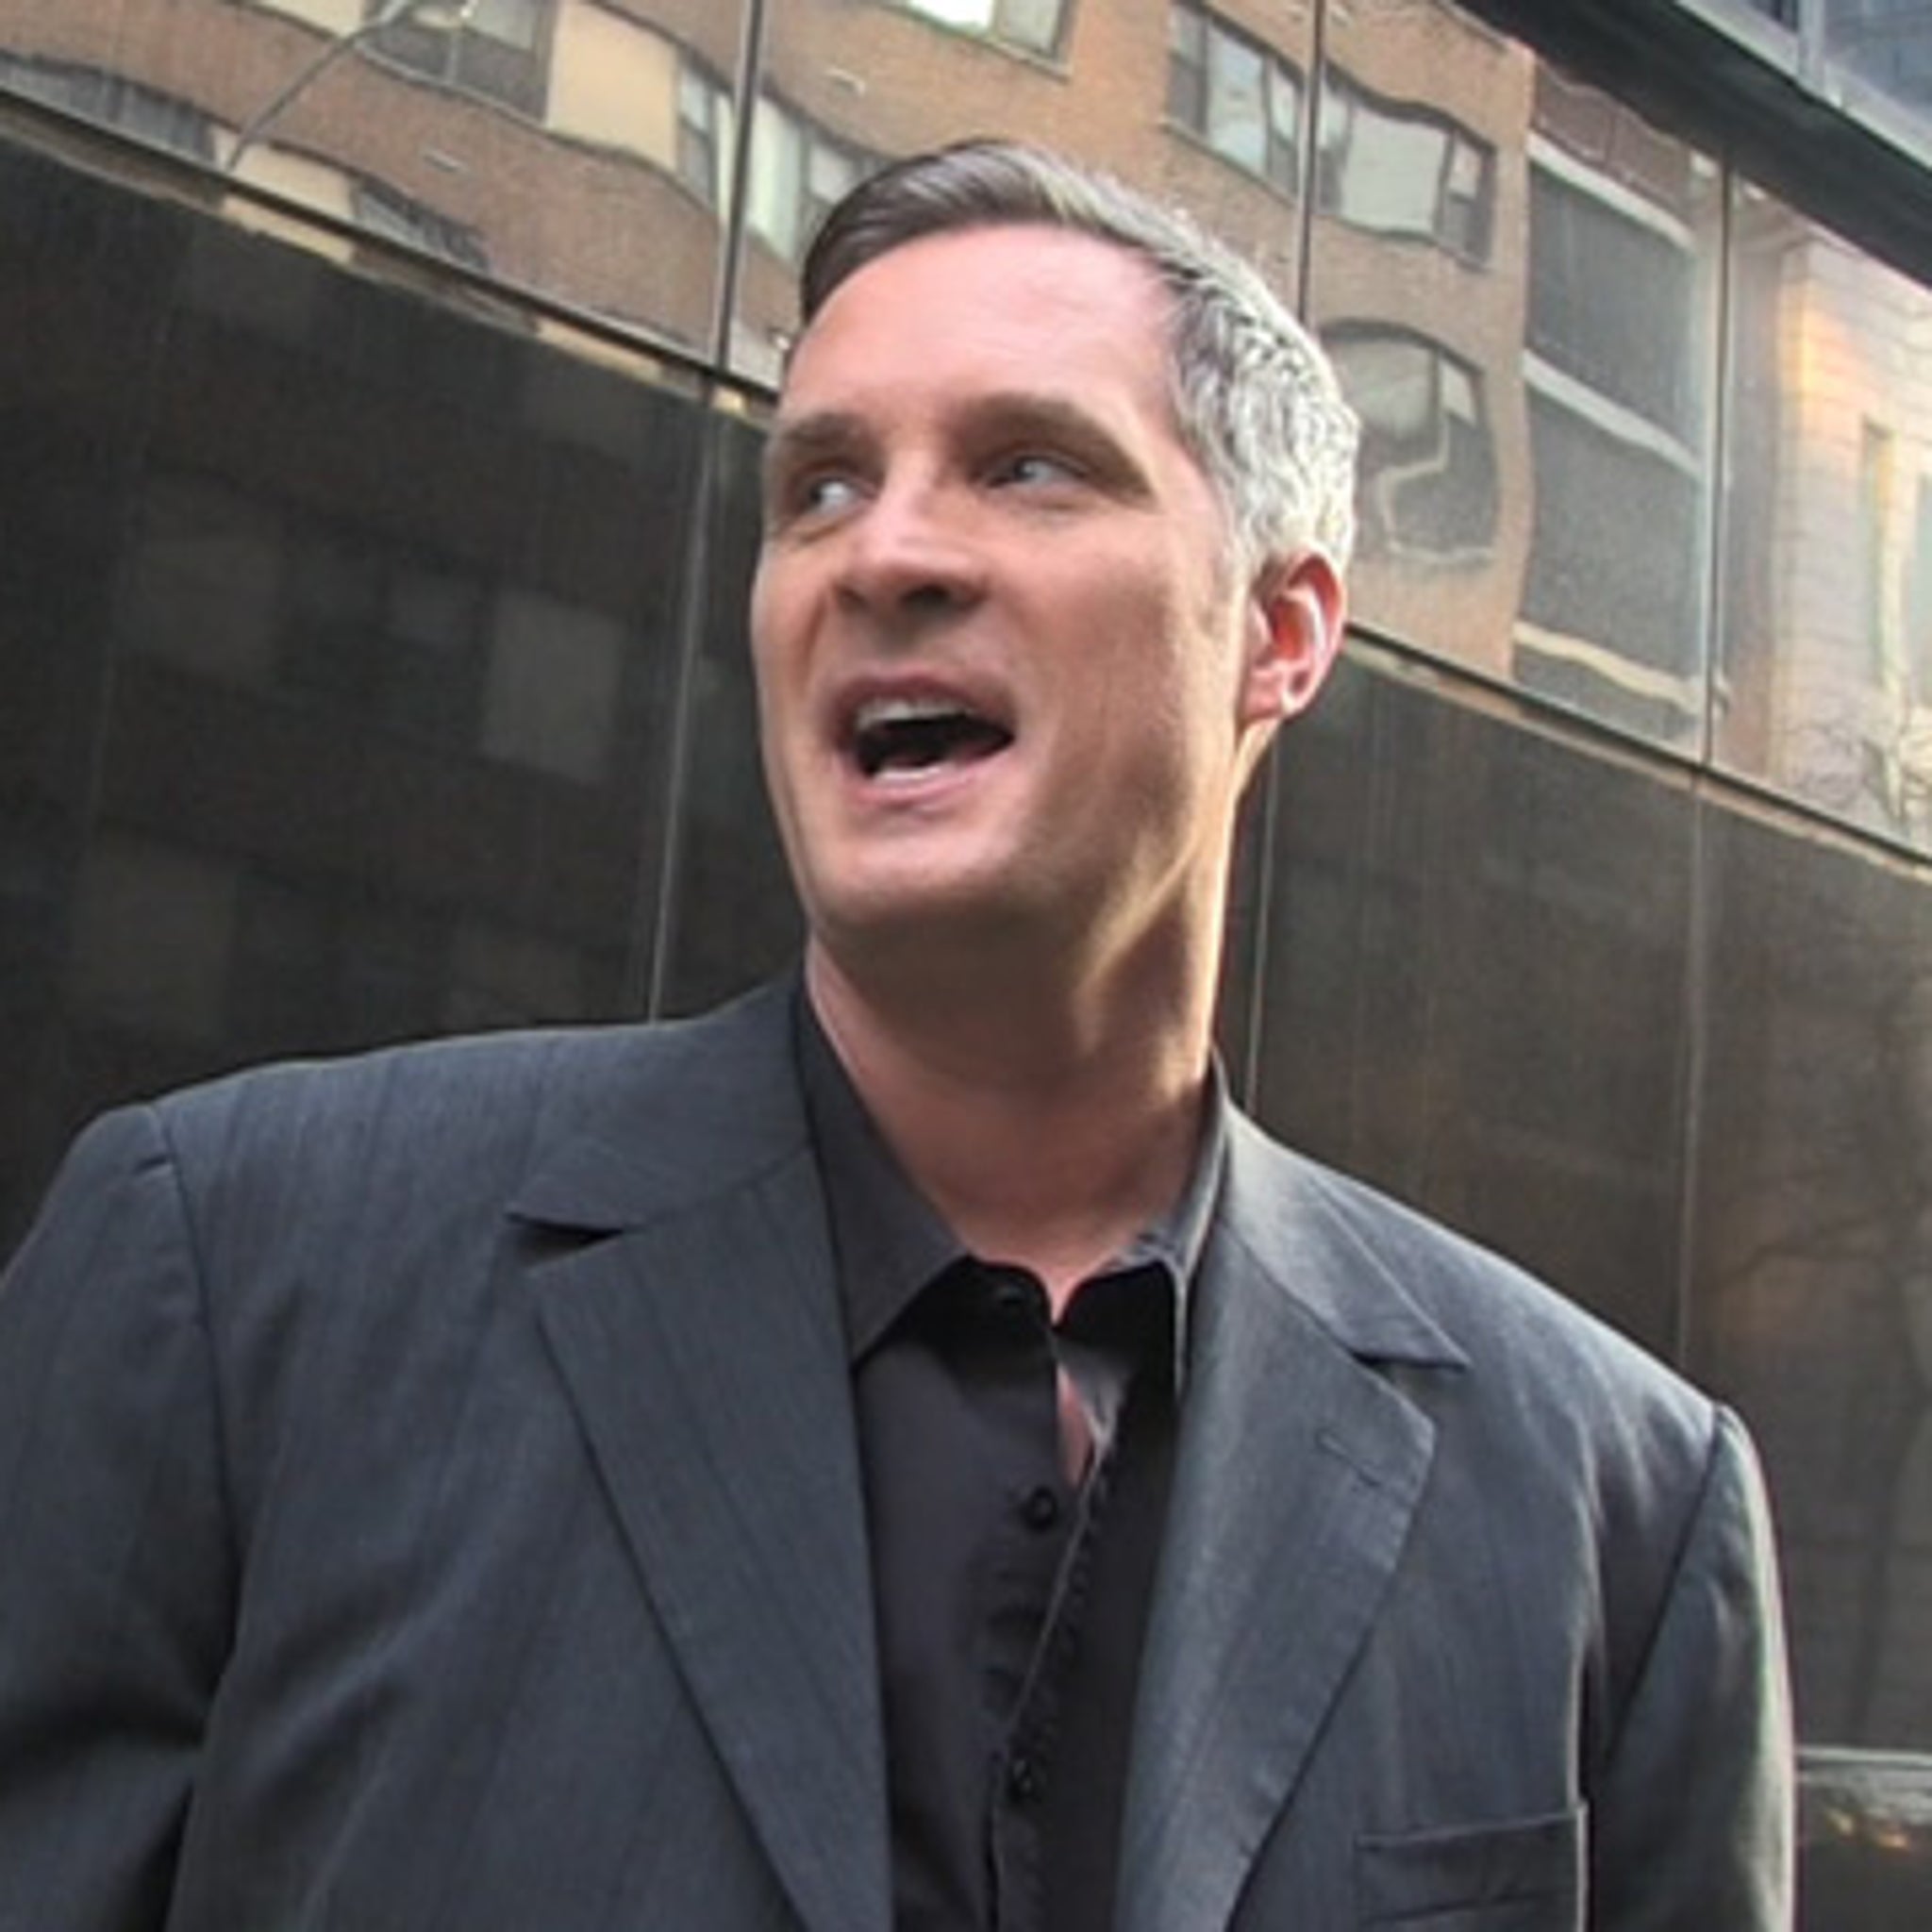 Why does everyone hate Christian Laettner? Everyone should love